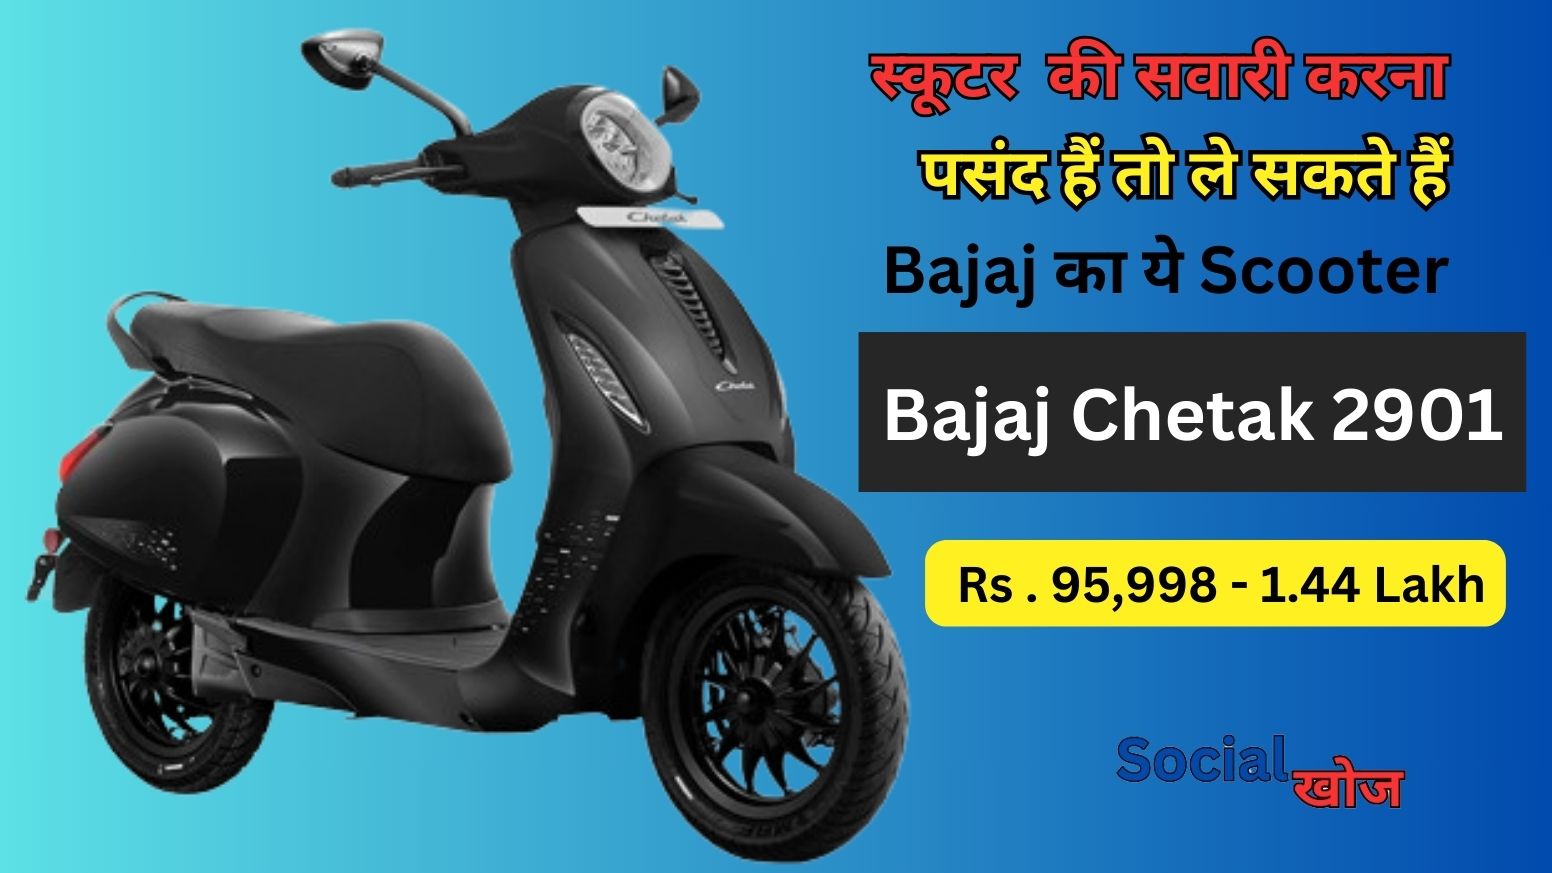 Bajaj Chetak 2901 launched in India under Rs 1 lakh. Check price, features, Latest